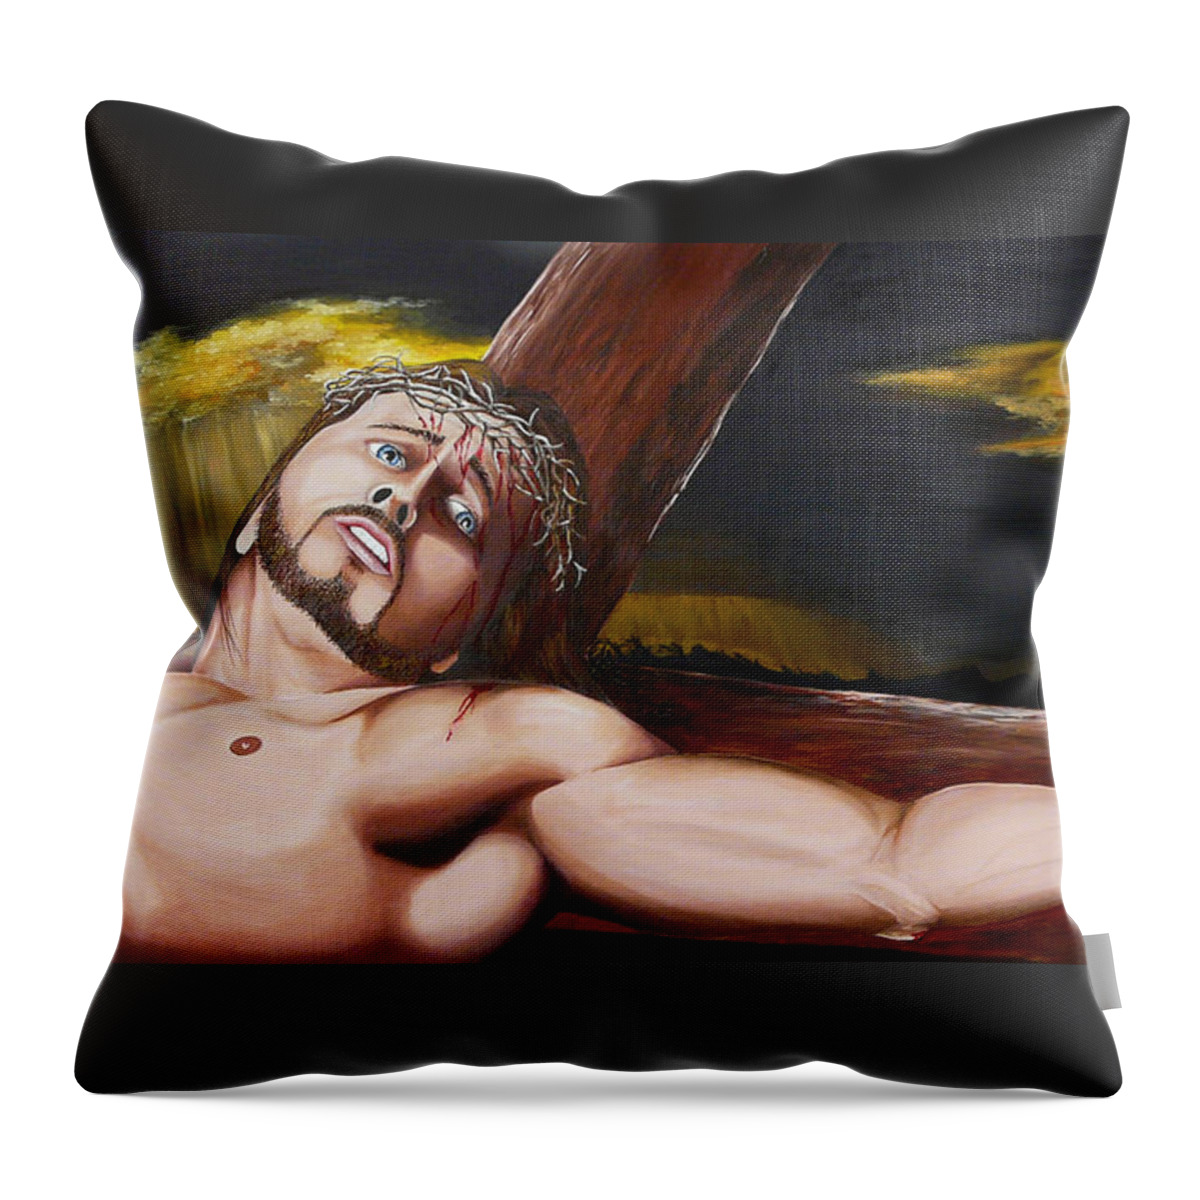 Christ Throw Pillow featuring the painting Christ's Anguish by Vic Ritchey